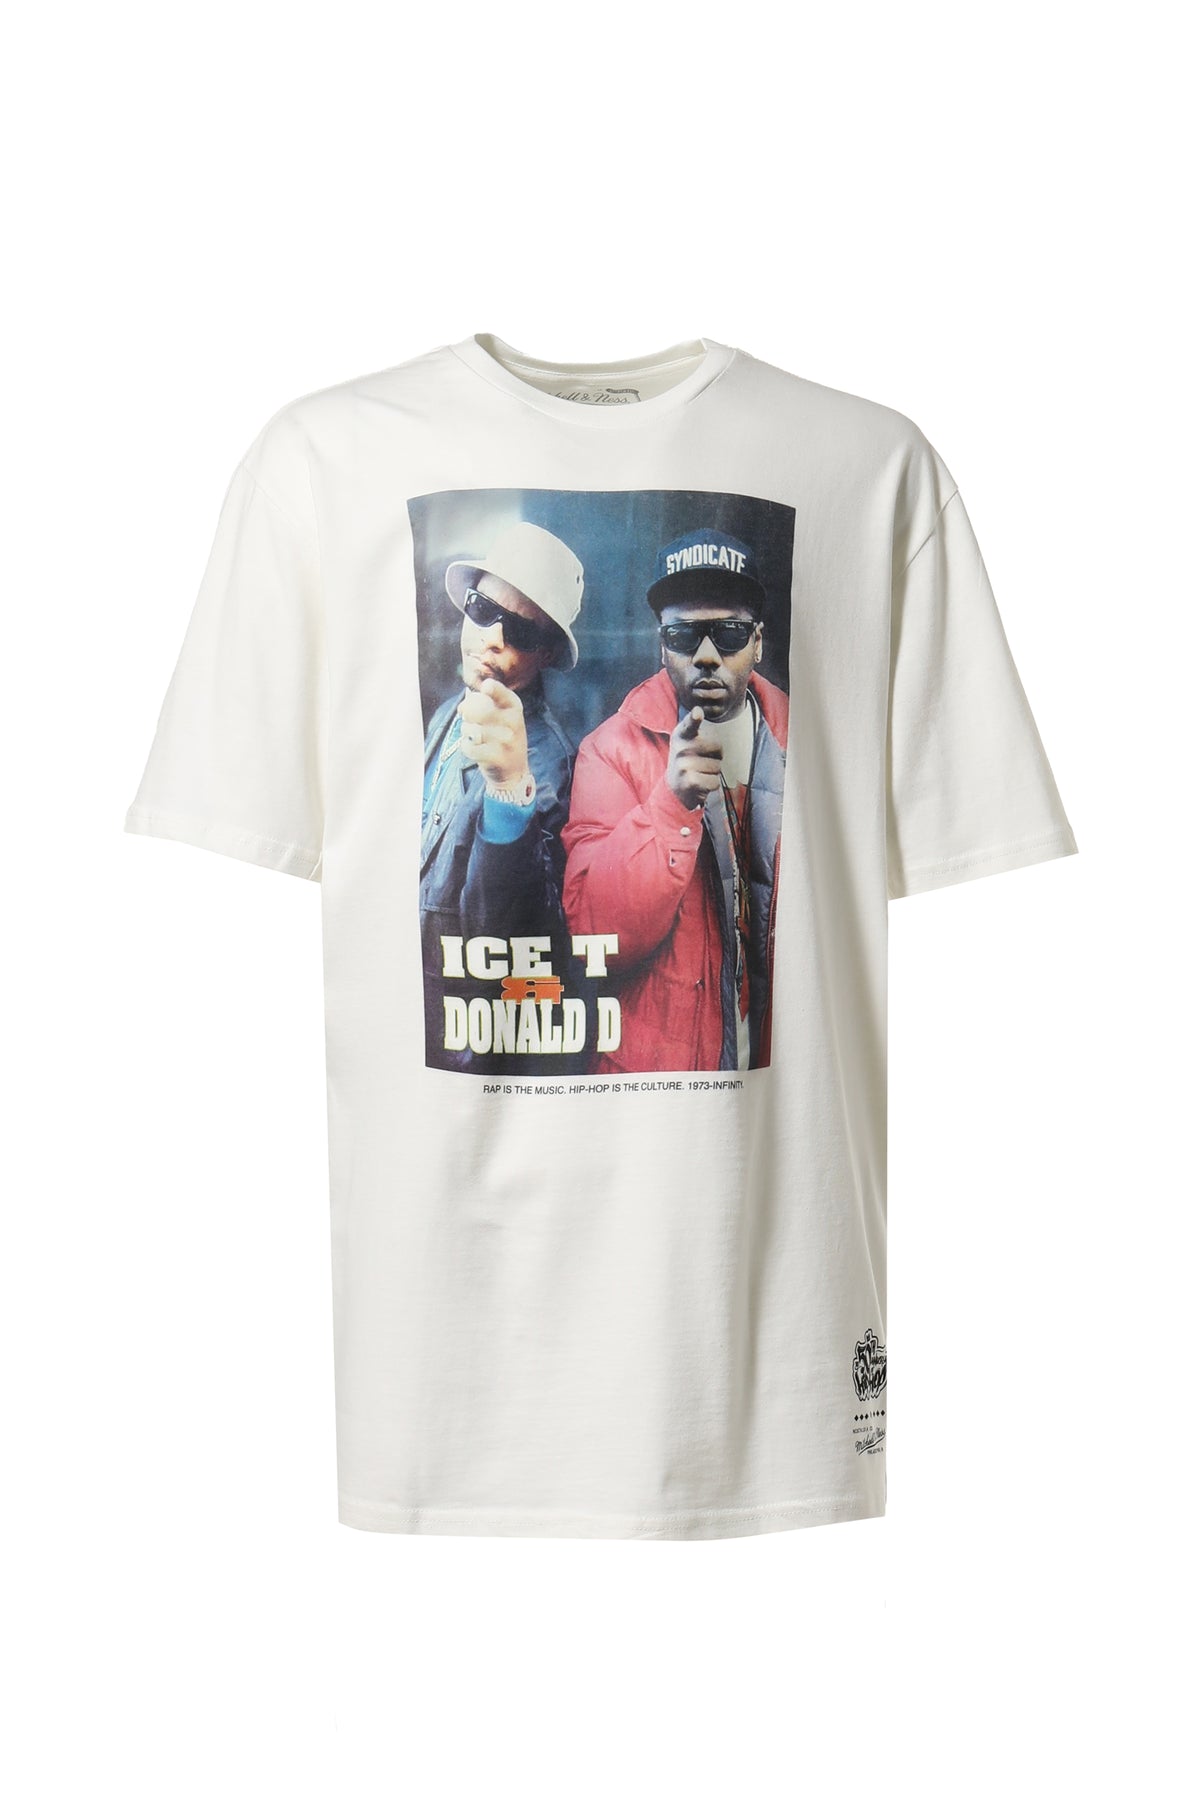 Official ice-T & Donald D Mitchell & Ness 50th Anniversary of Hip